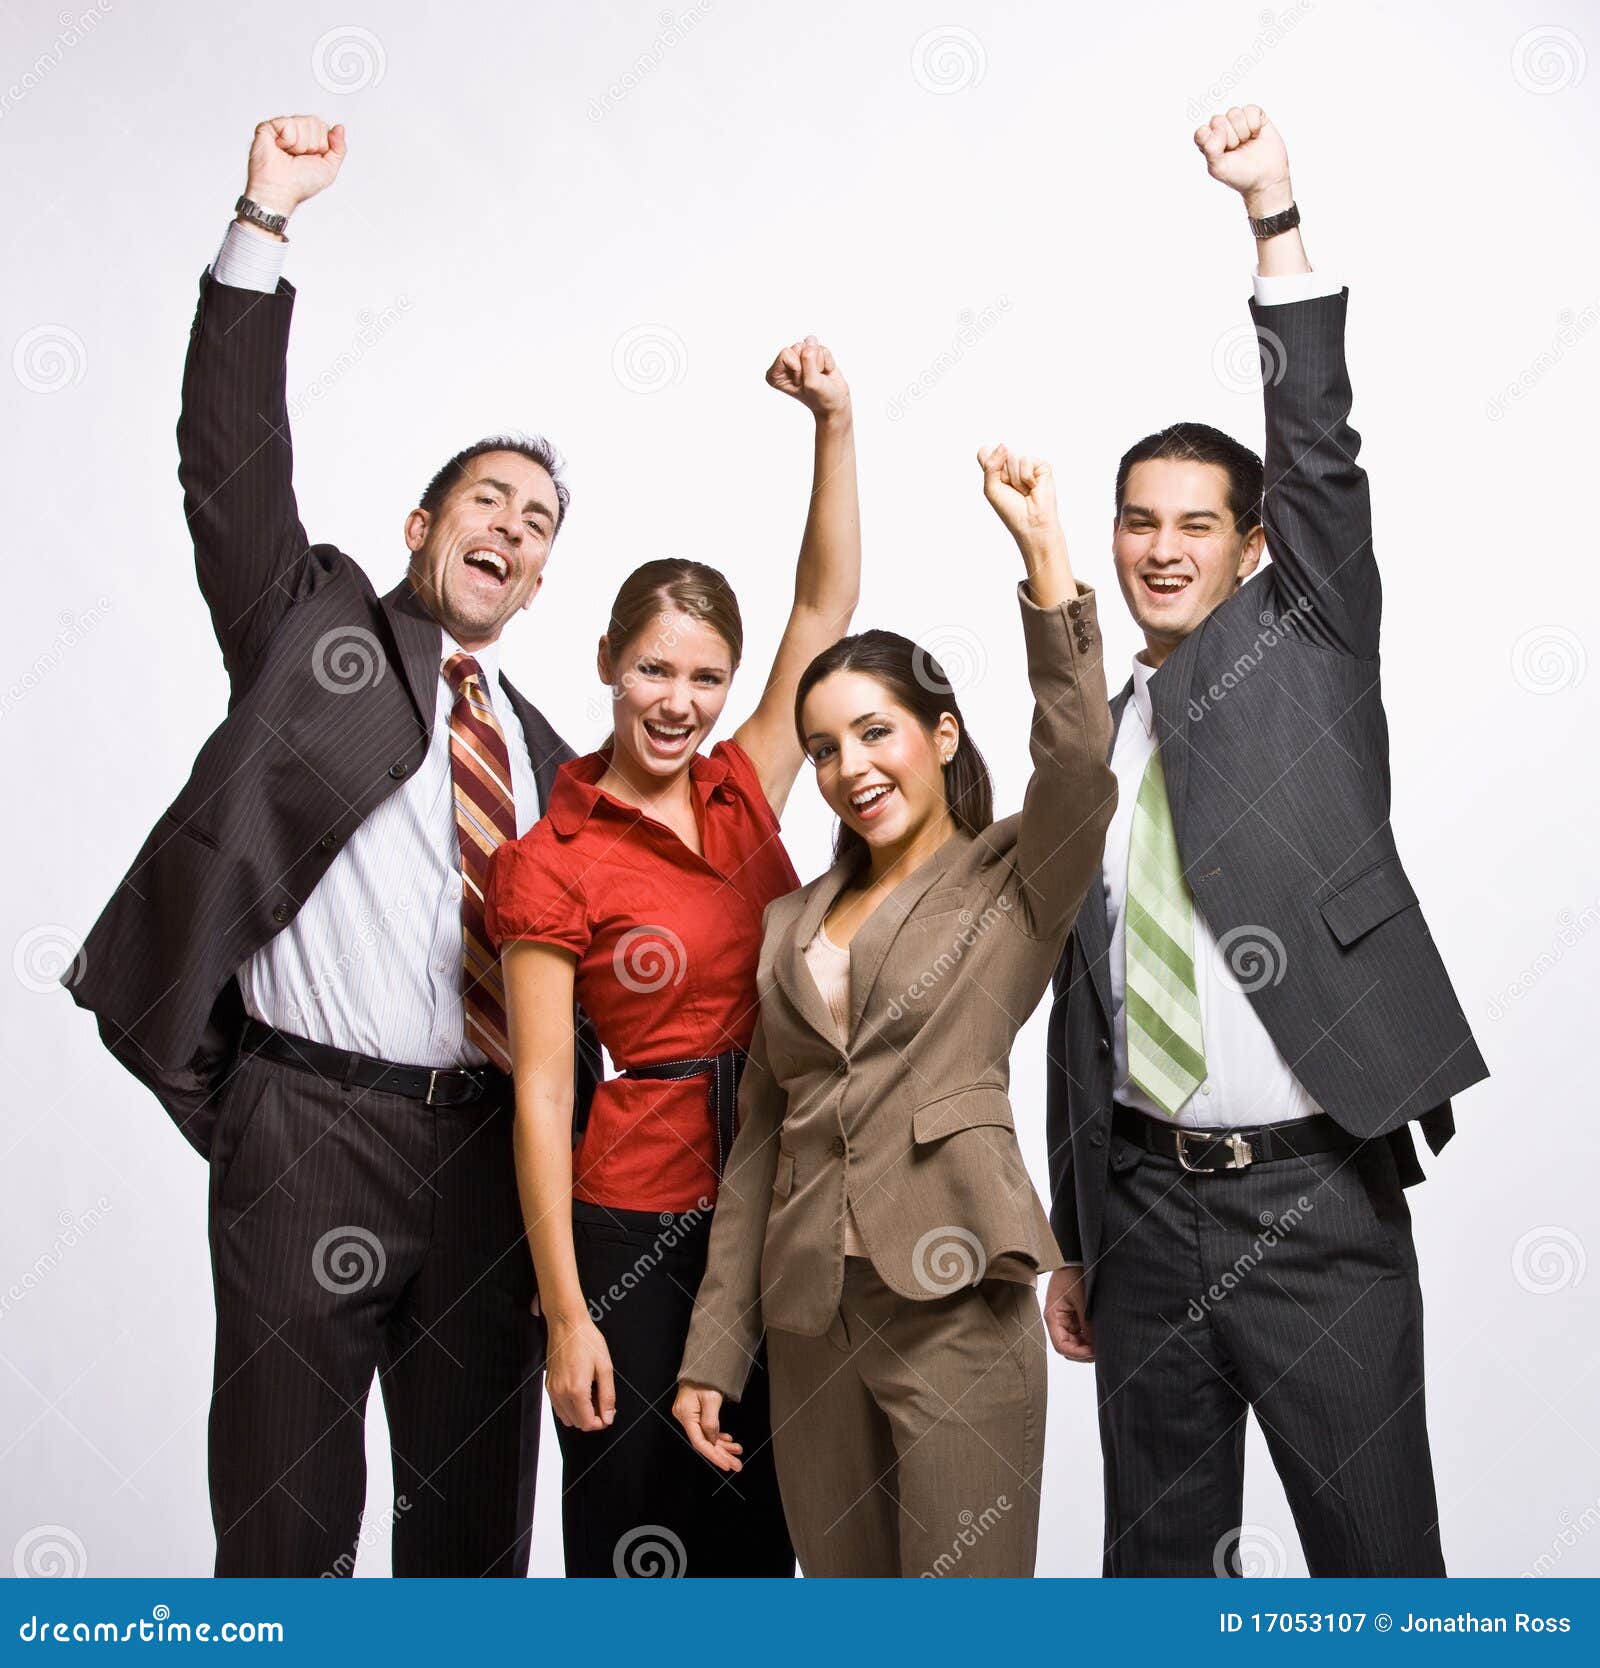 business people cheering